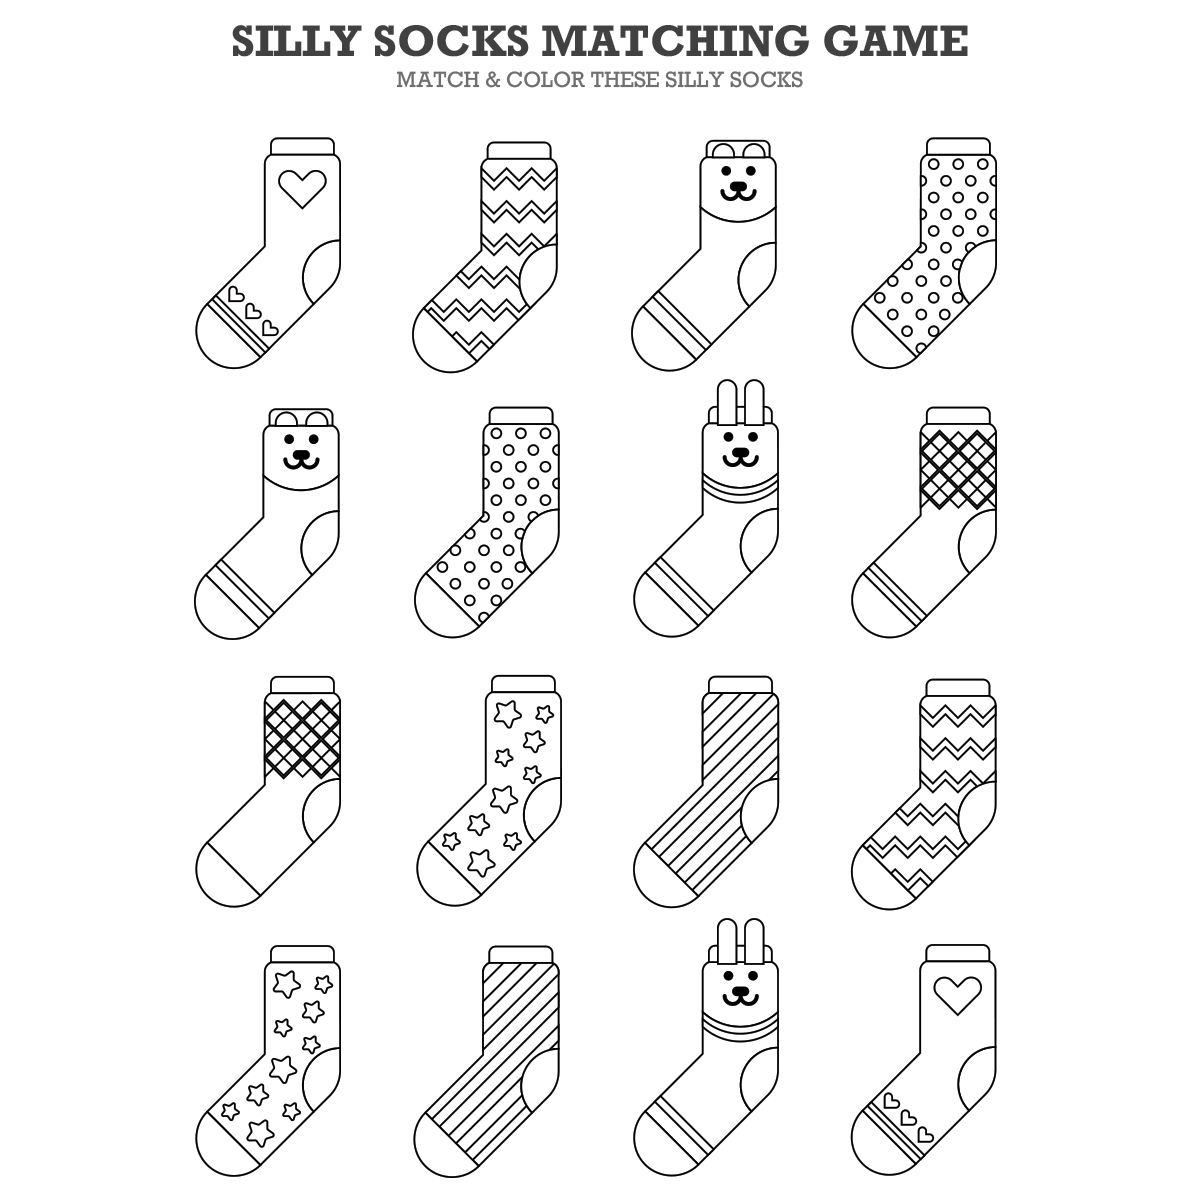 Fox in Socks Silly Socks Matching Game Printable